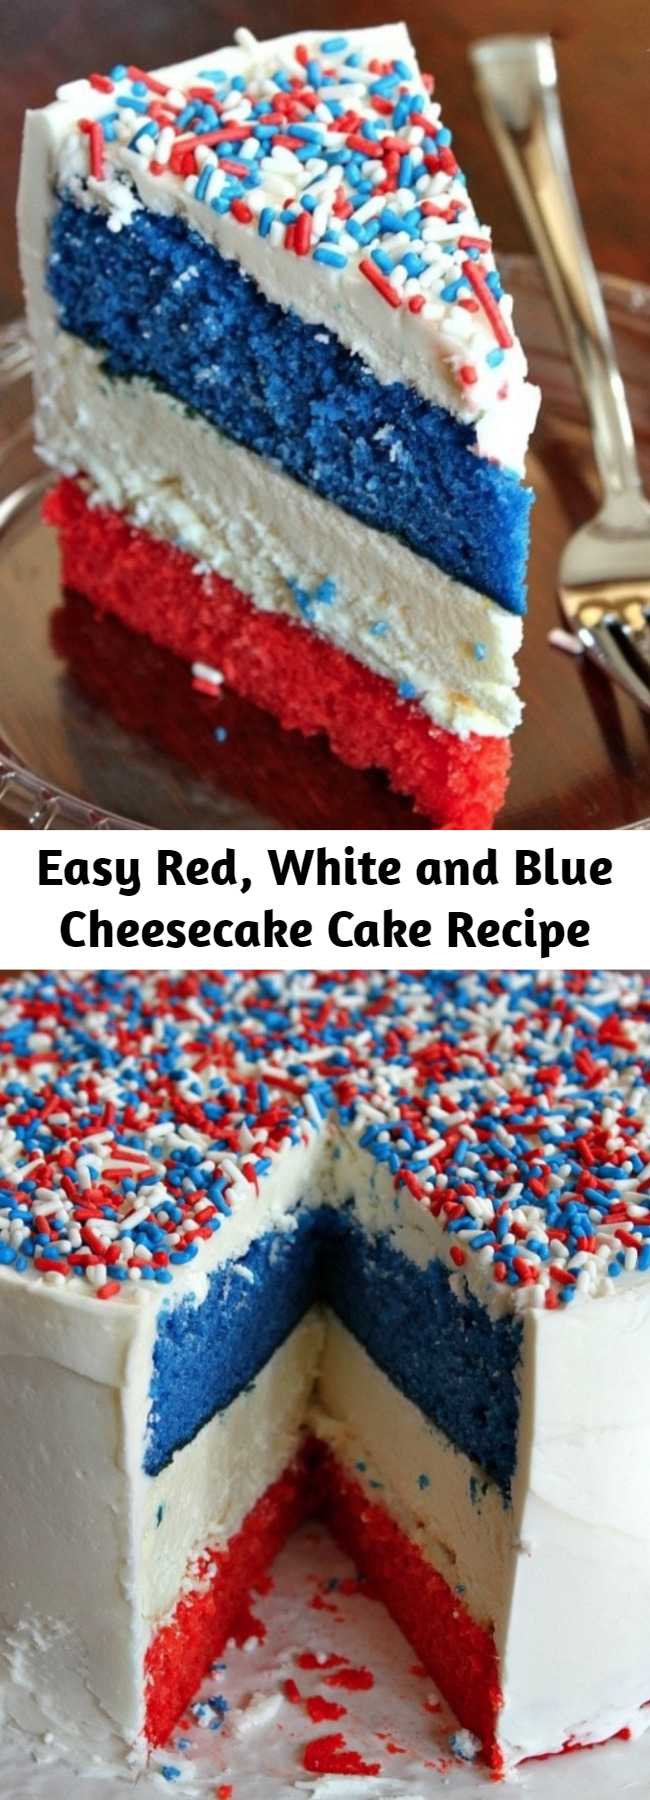 Easy Red, White and Blue Cheesecake Cake Recipe - This is an incredibly festive cake for summer holiday parties! It’s easy to make (I promise), and you might just impress people at a summer party if you show up with a cake like this Red, White and Blue Cheesecake Cake.